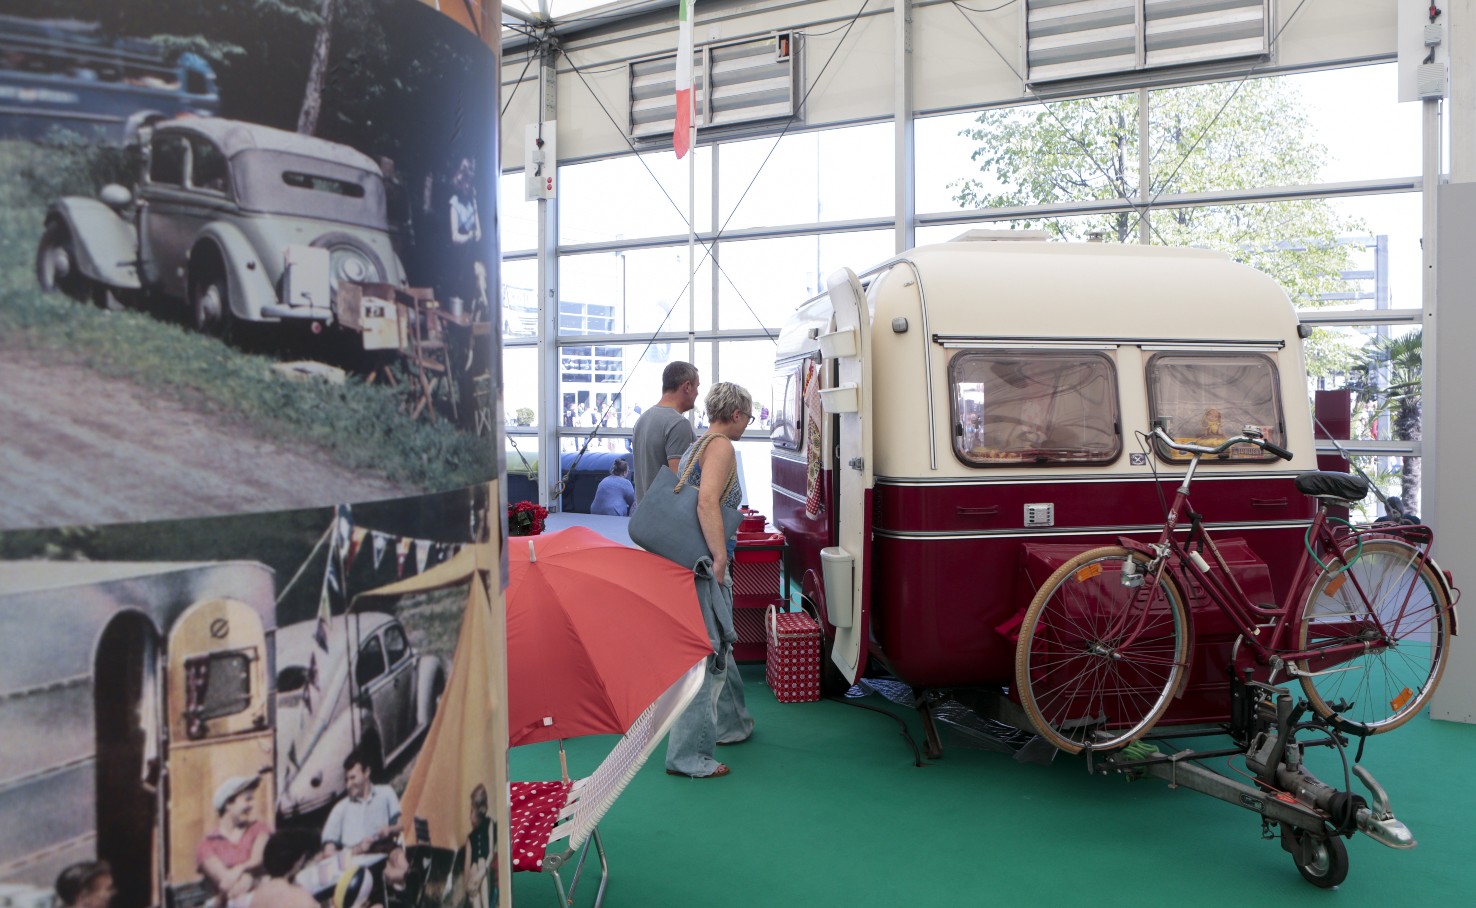 Not only new. Retro camping, from the Caravan Salon 2018 archive – main image